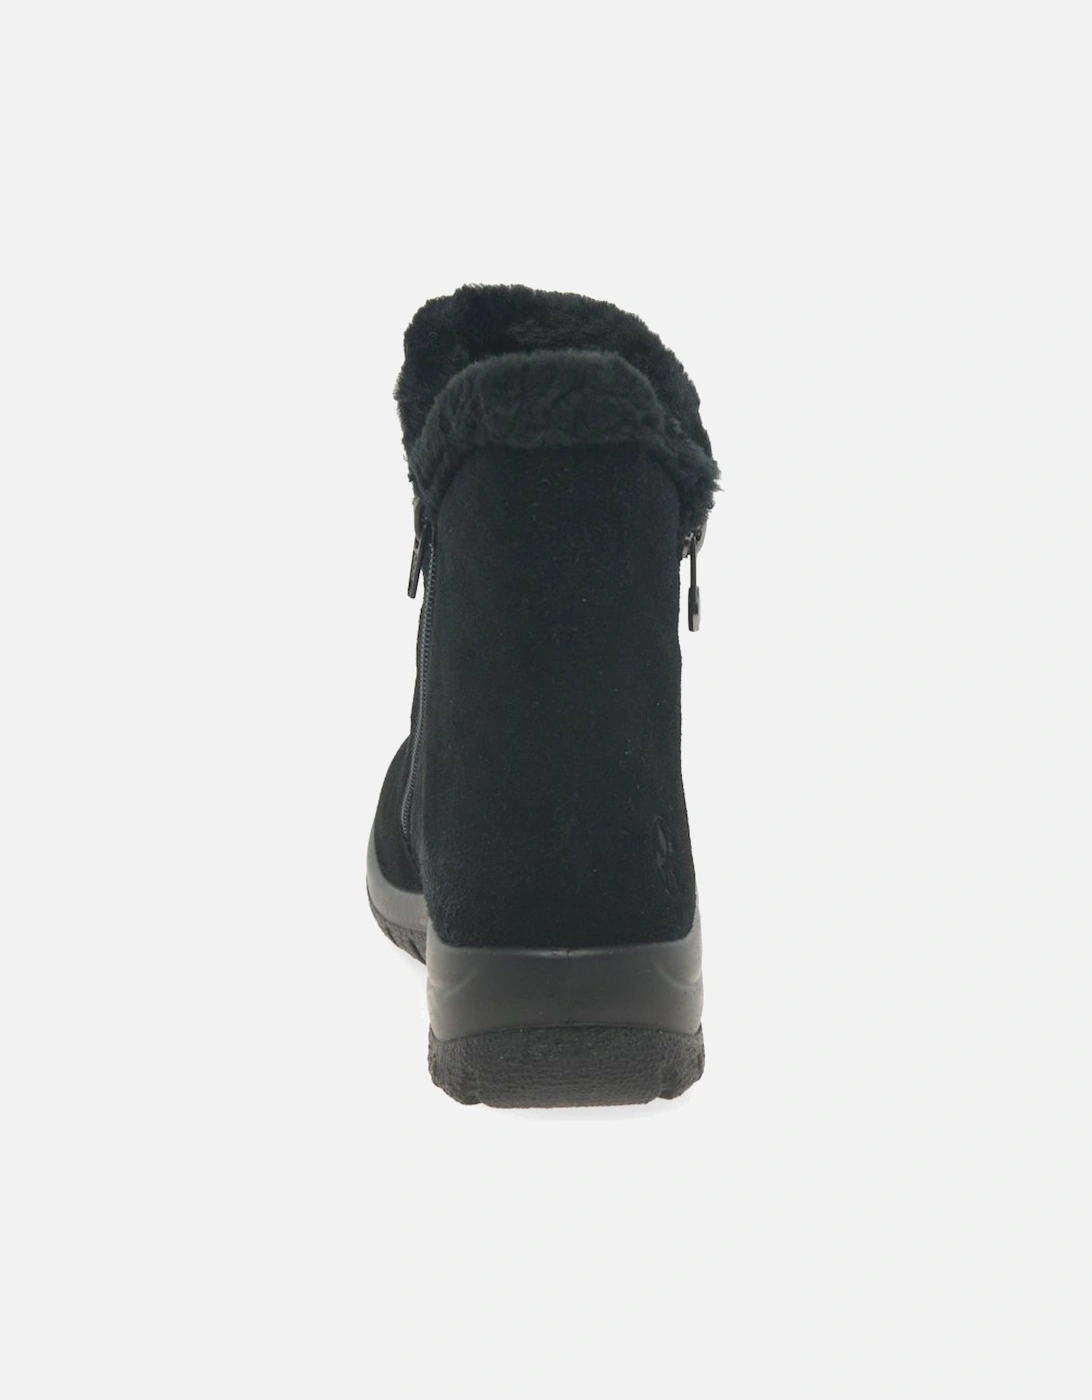 Everest Womens Ankle Boots